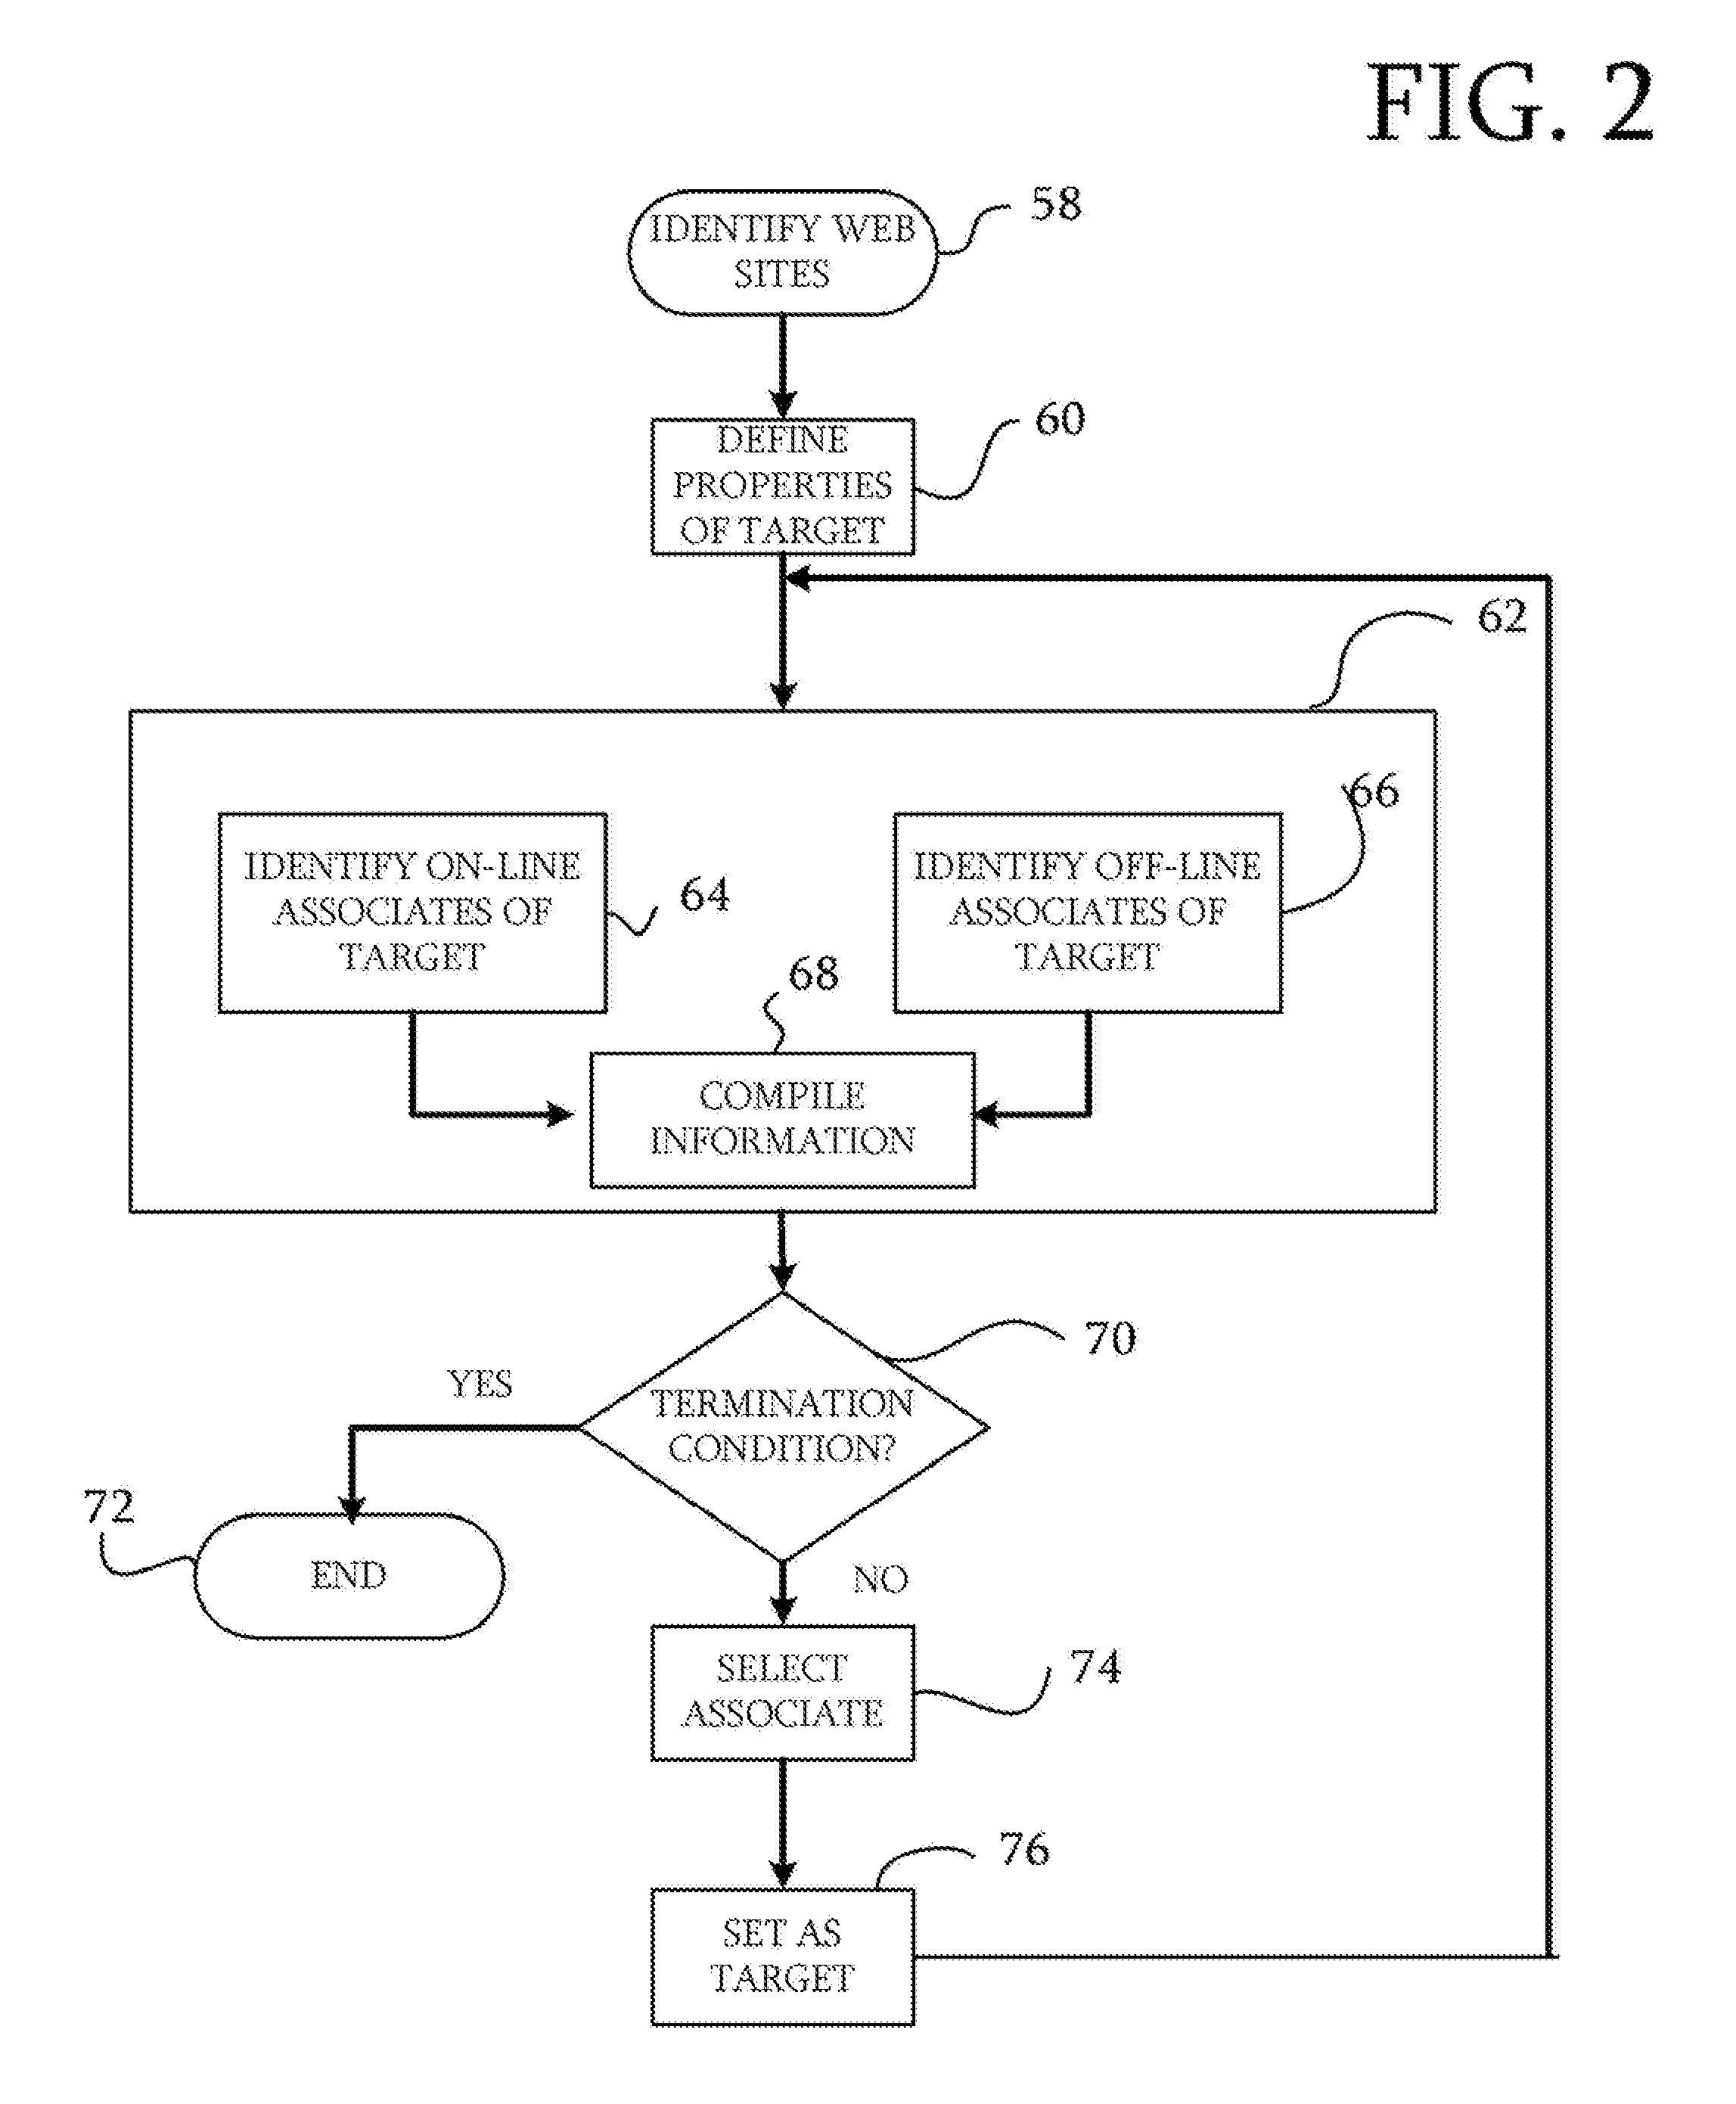 System and Method for Target Profiling Using Social Network Analysis